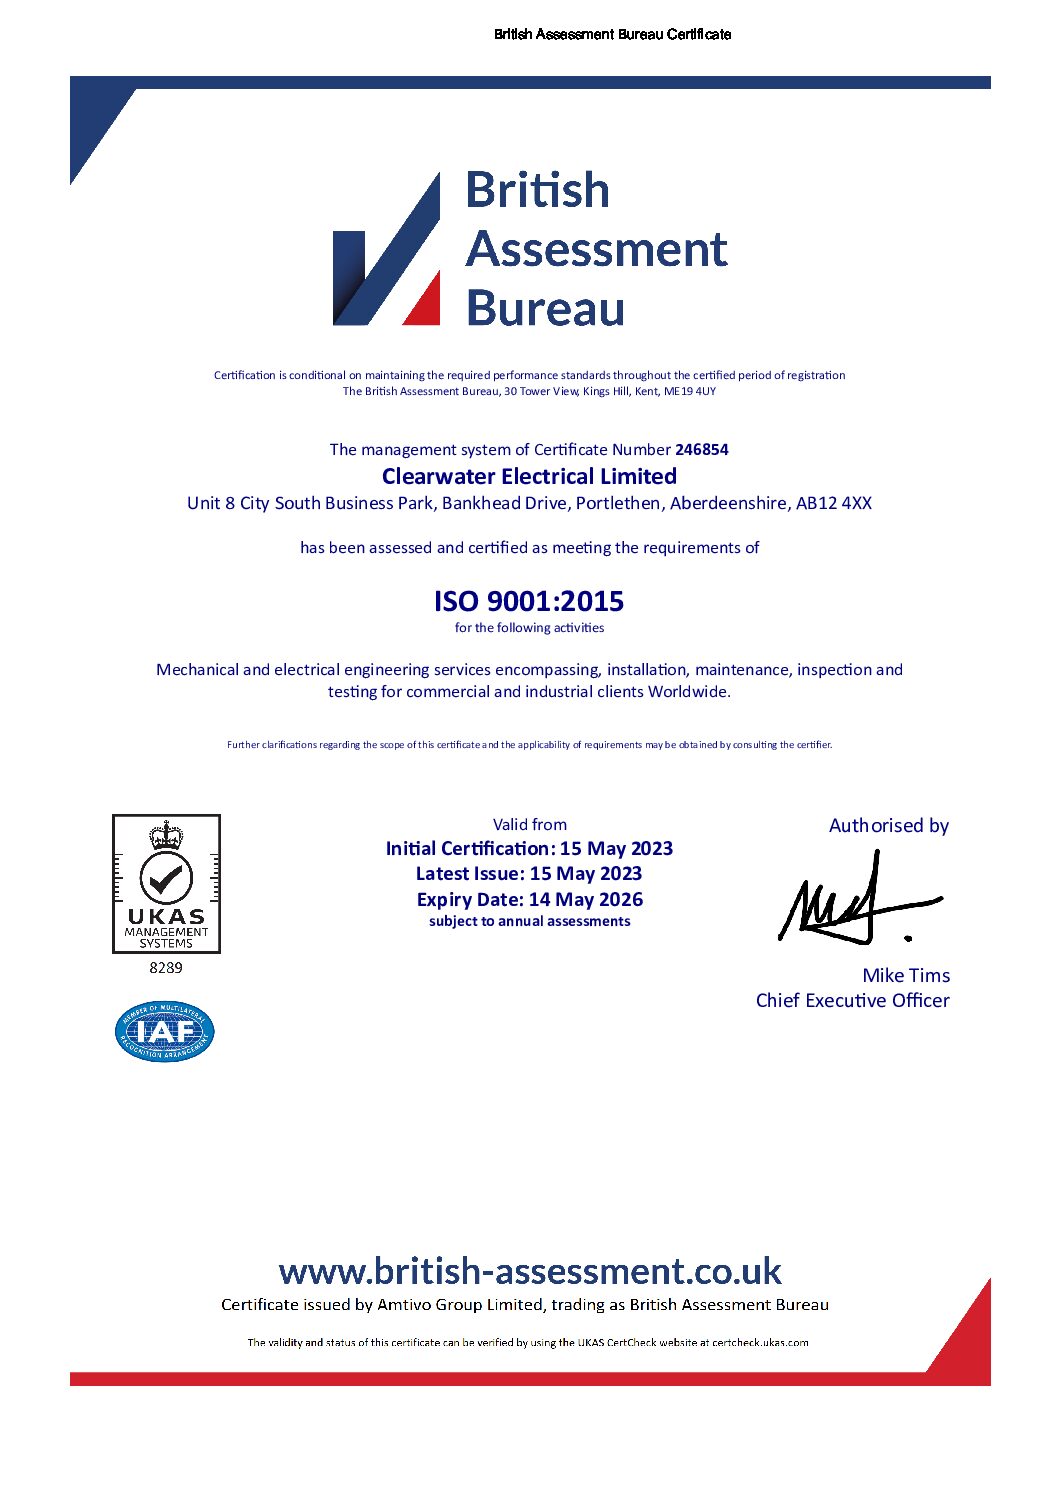 Certificate of ISO 9001:2015